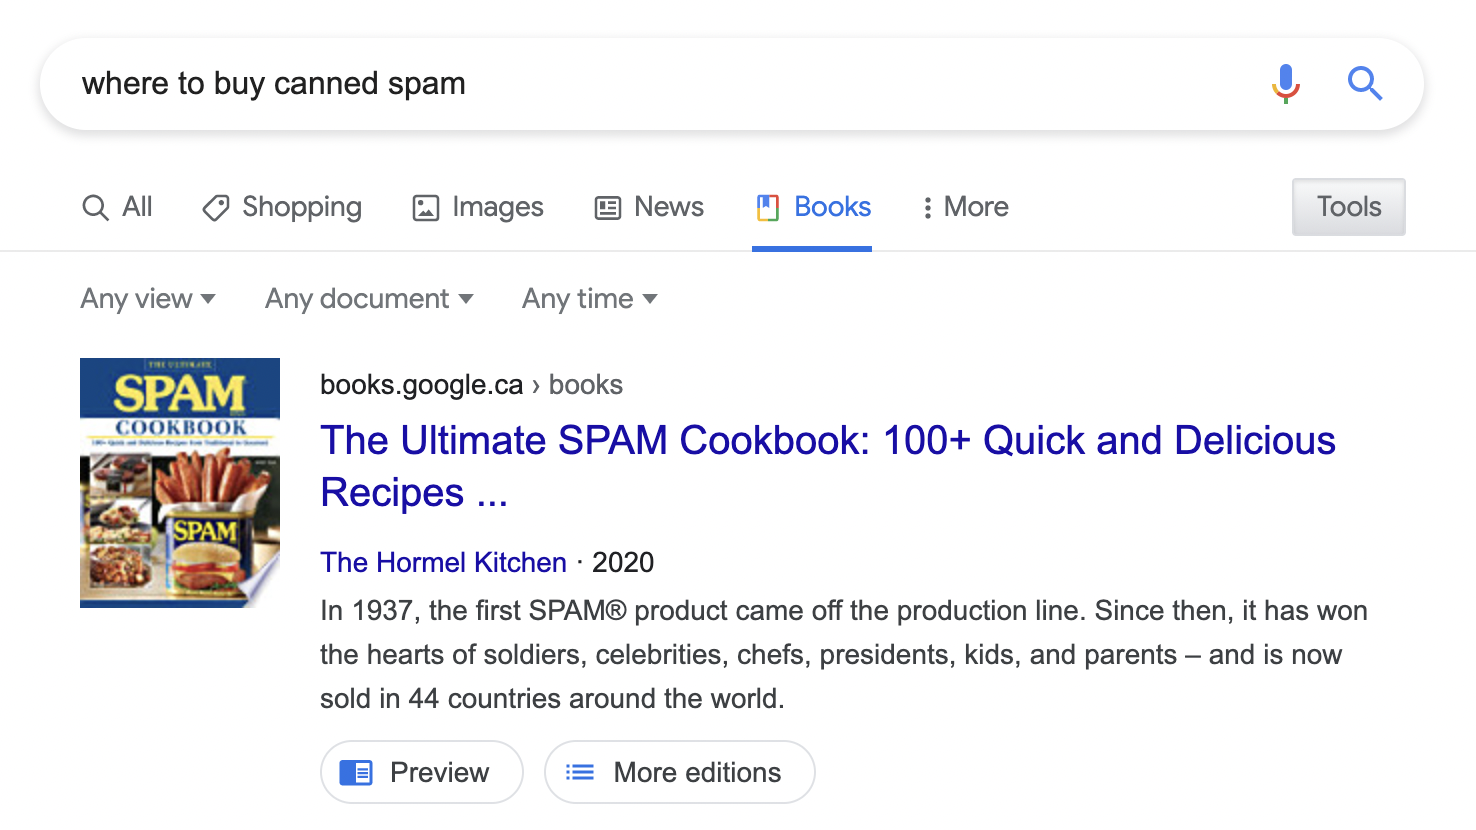 A cookbook from the Hormel Kitchen about how to cook spam for celebrities